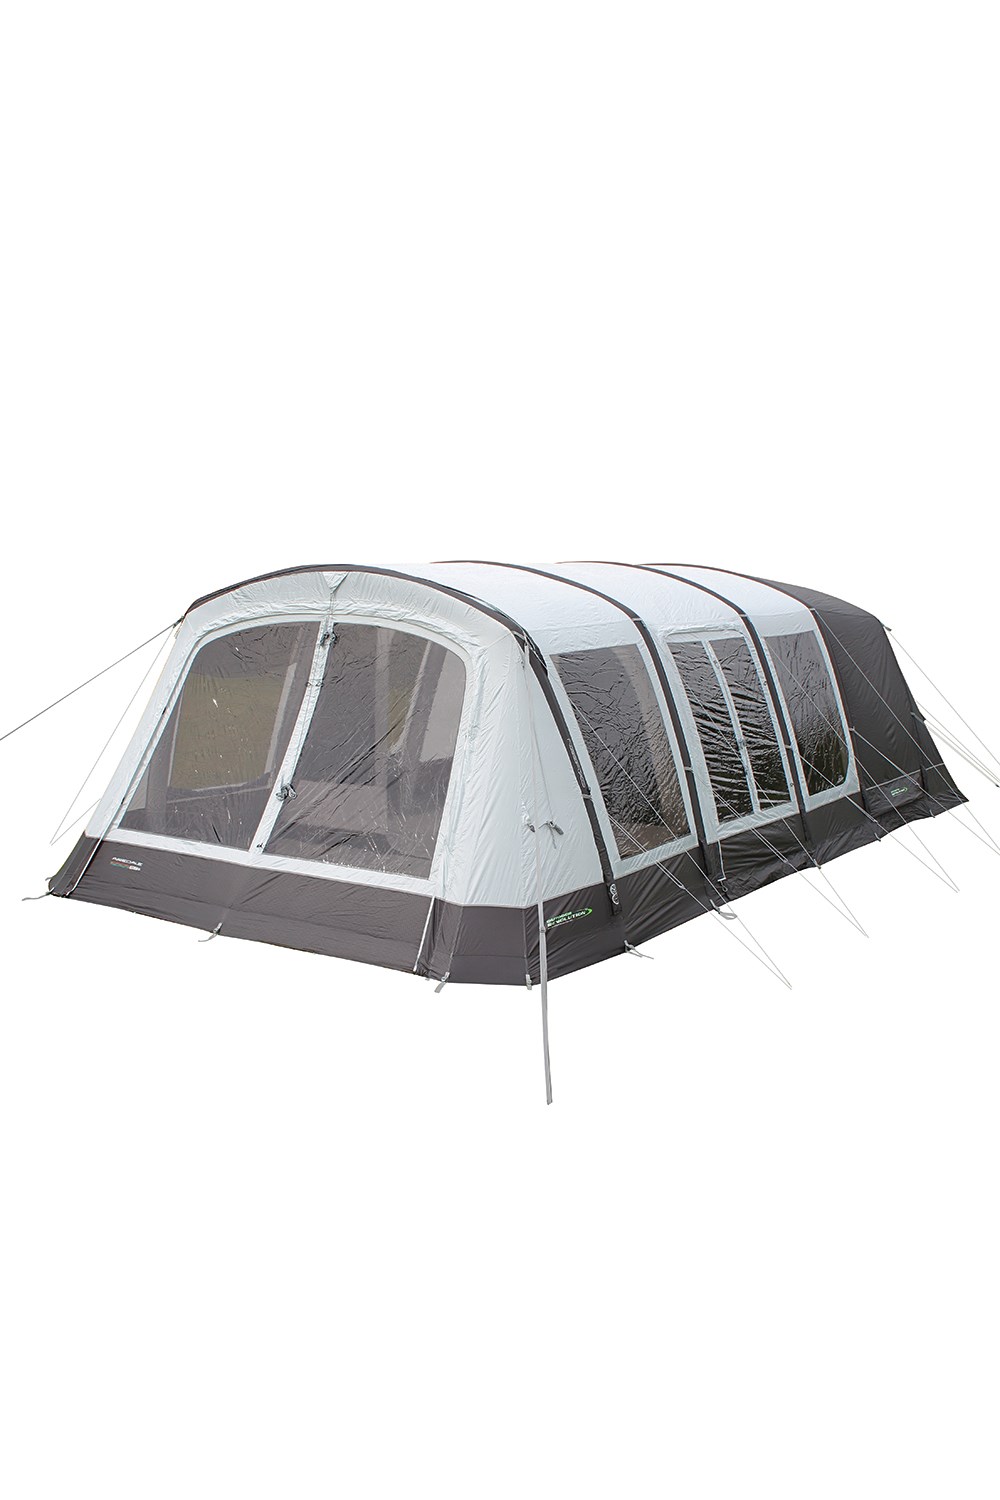 Airedale 6. 0s (2022) 6 Man Tent -